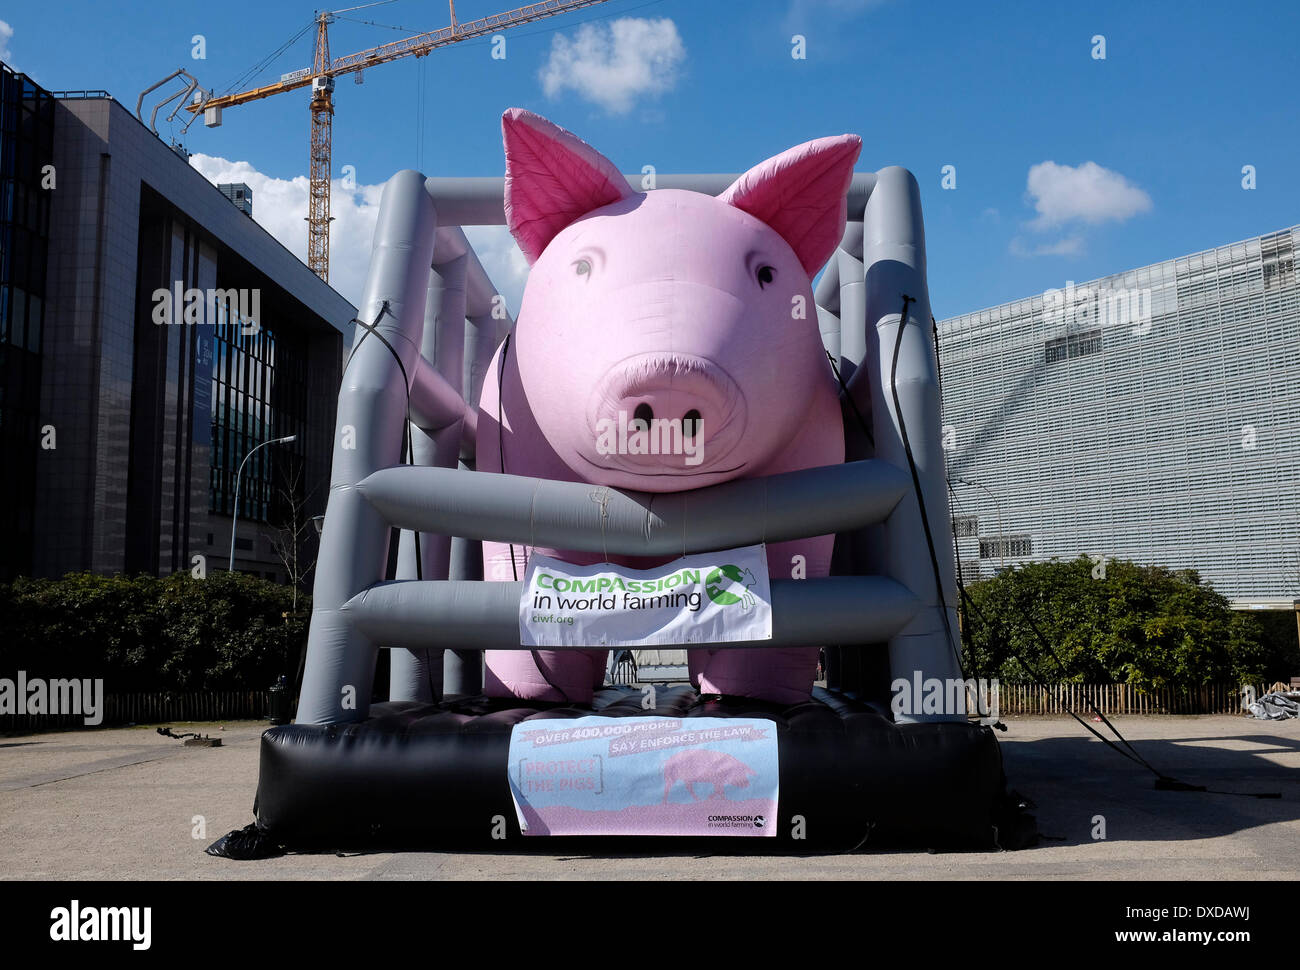 A giant inflated pig in a cage stands near the EU headquarters where the European Agriculture ministers gather for their council meeting in Brussels, Belgium on 24.03.2014 The pig is set up by animal rights activists of Compassion in World Farming (CIWF) who protest to raise awareness for the plight of pigs in countries where they are suffering in illegal and inhumane conditions. by Wiktor Dabkowski Stock Photo